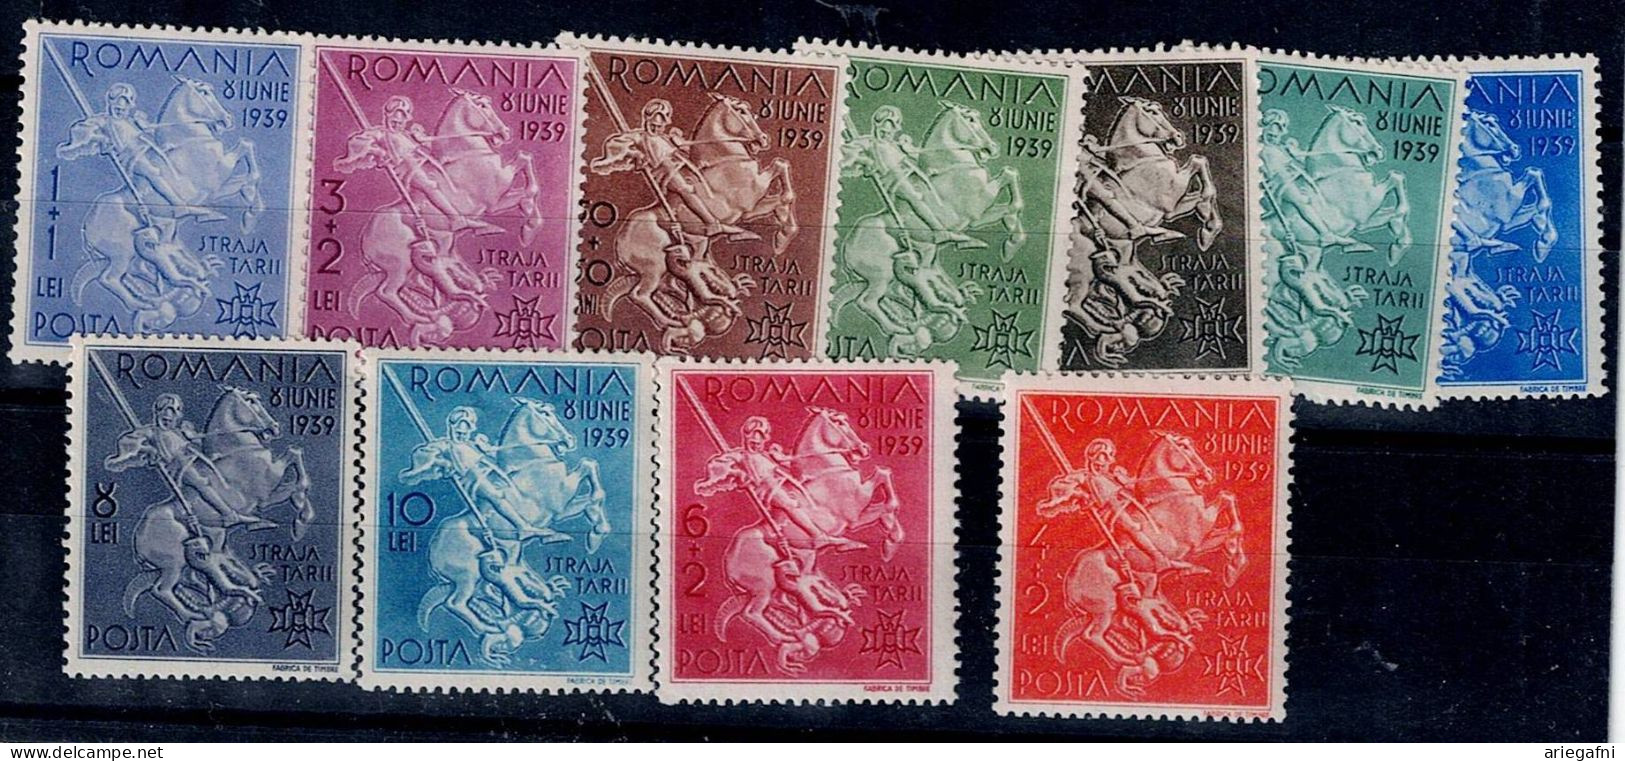 ROMANIA 1939 9TH ANNIVERSARY OF THE ACCEPTANCE OF KING CHARLES II MI 598-608 MNH VF!! - Neufs